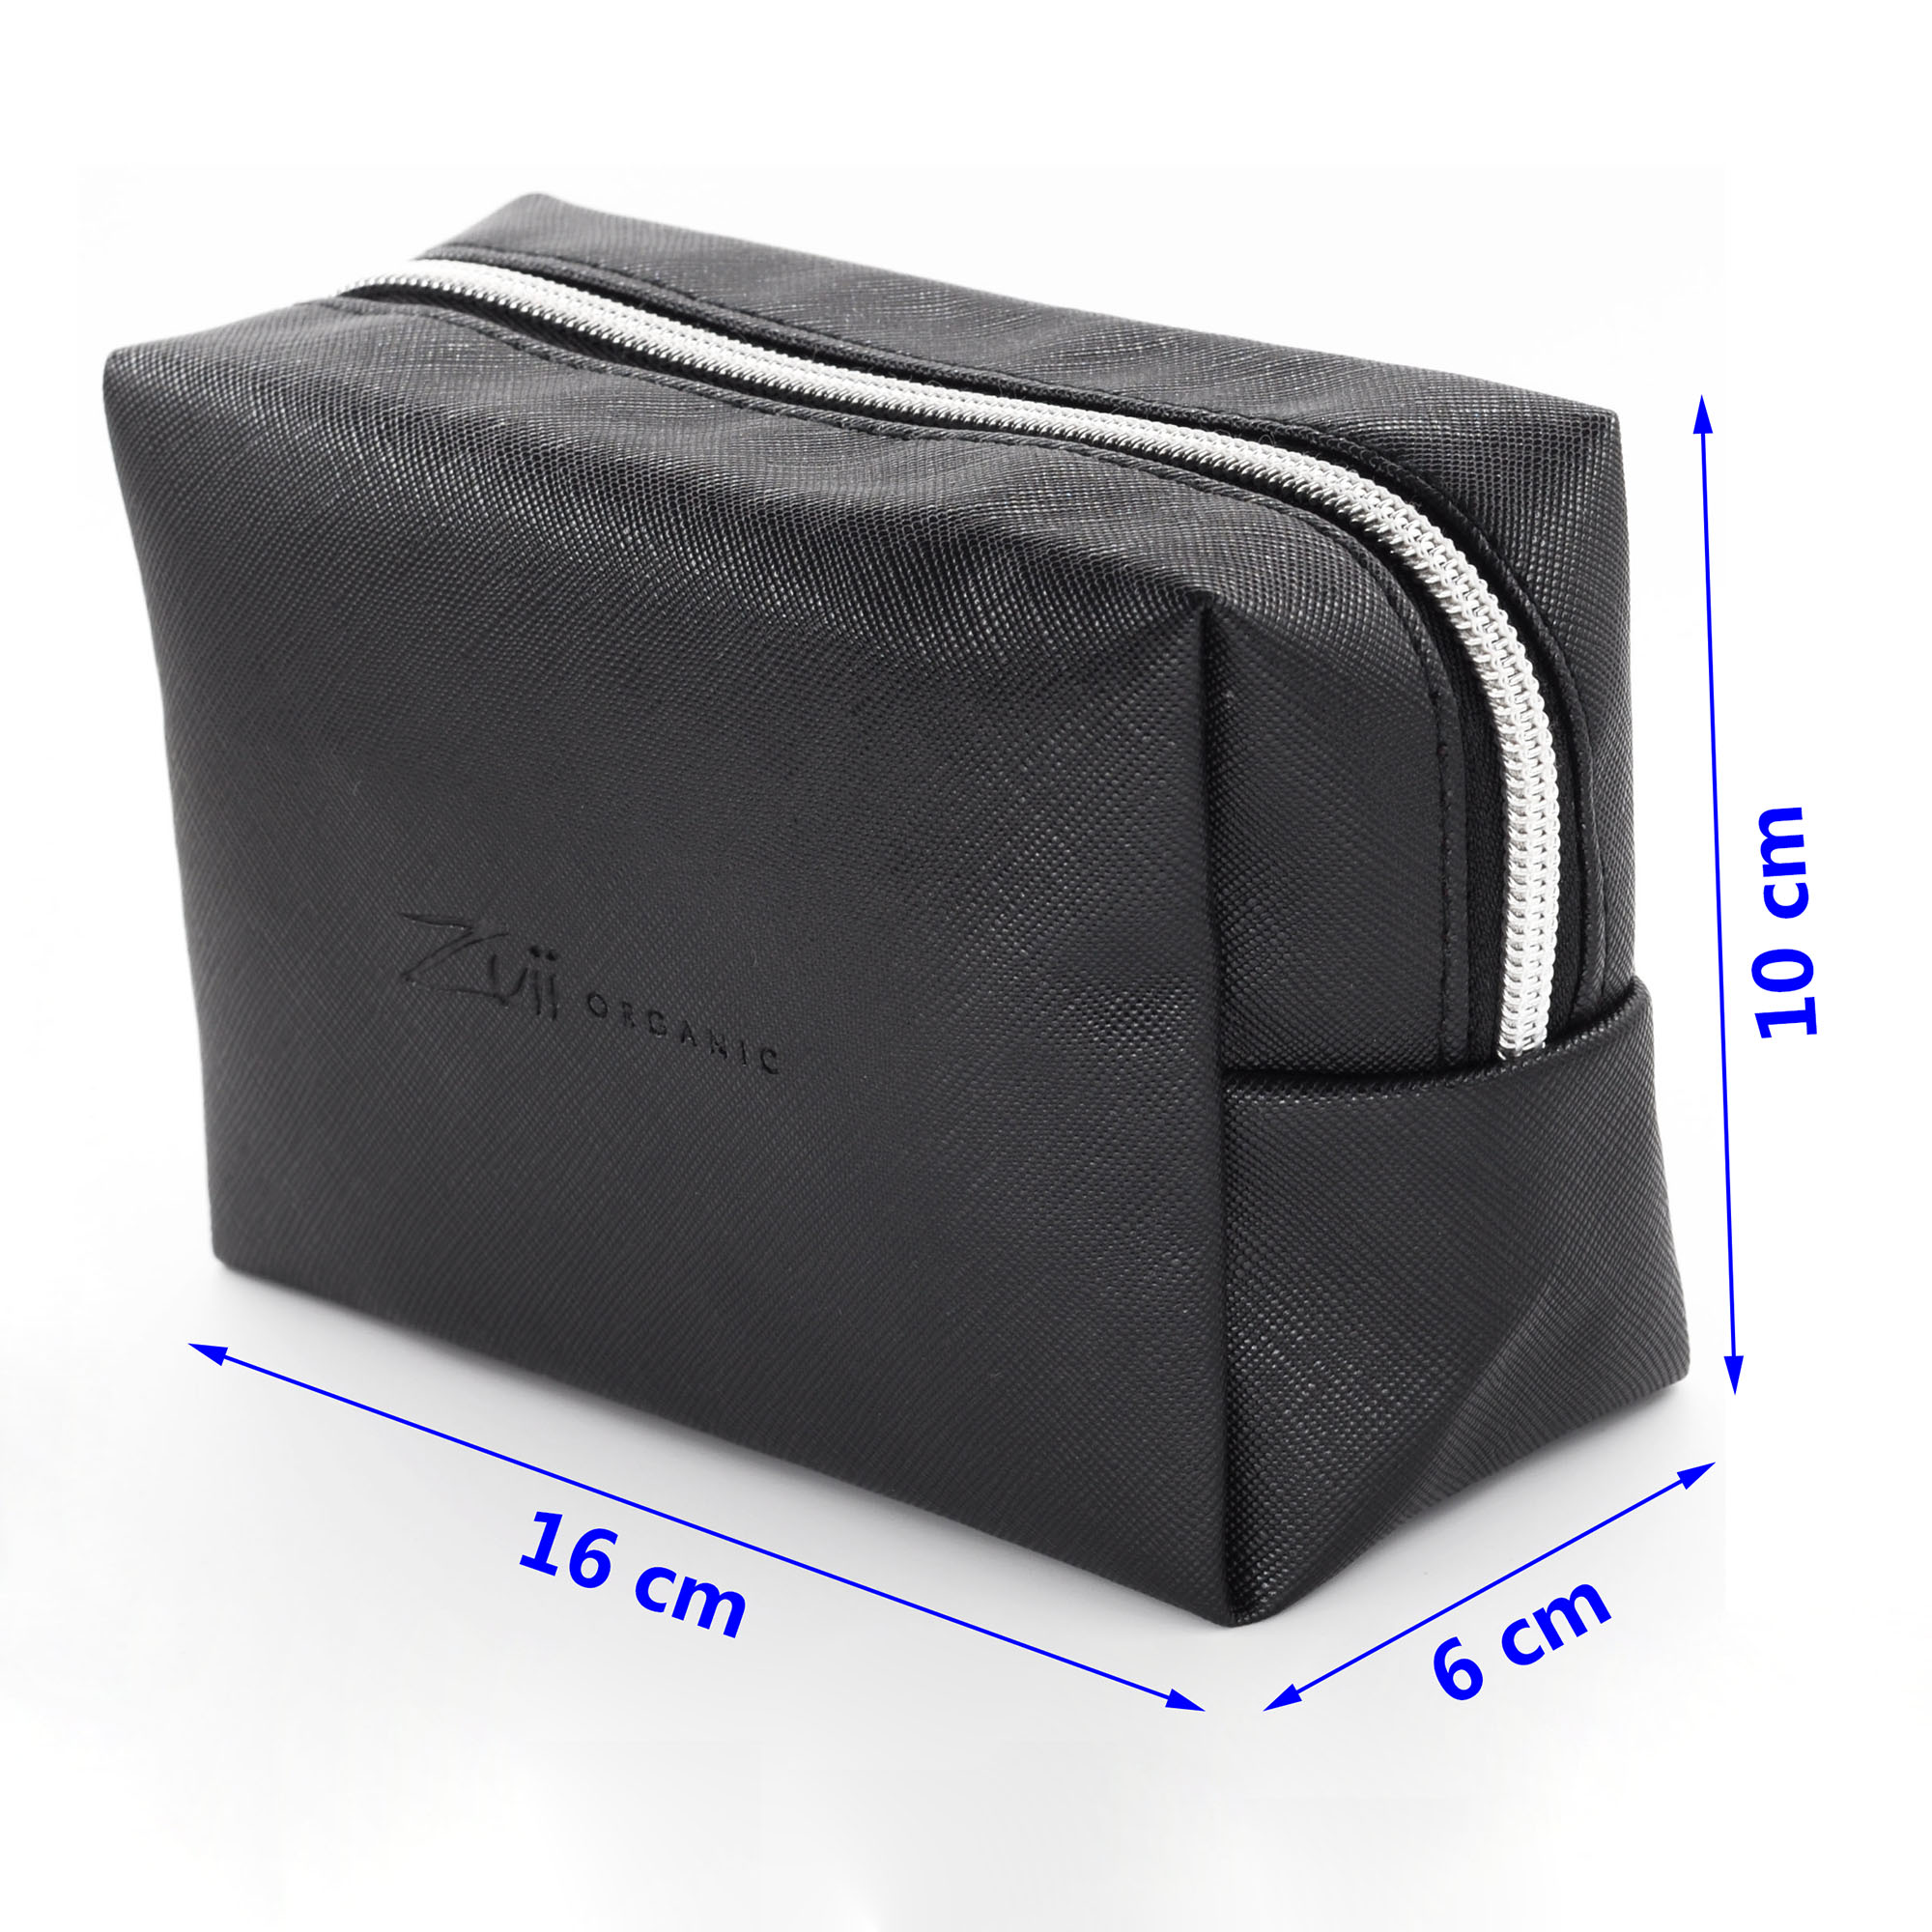 Wholesale Compact Leather Travel Toiletry Bag Small Essentials Bag with Zipper, Size Diagram.